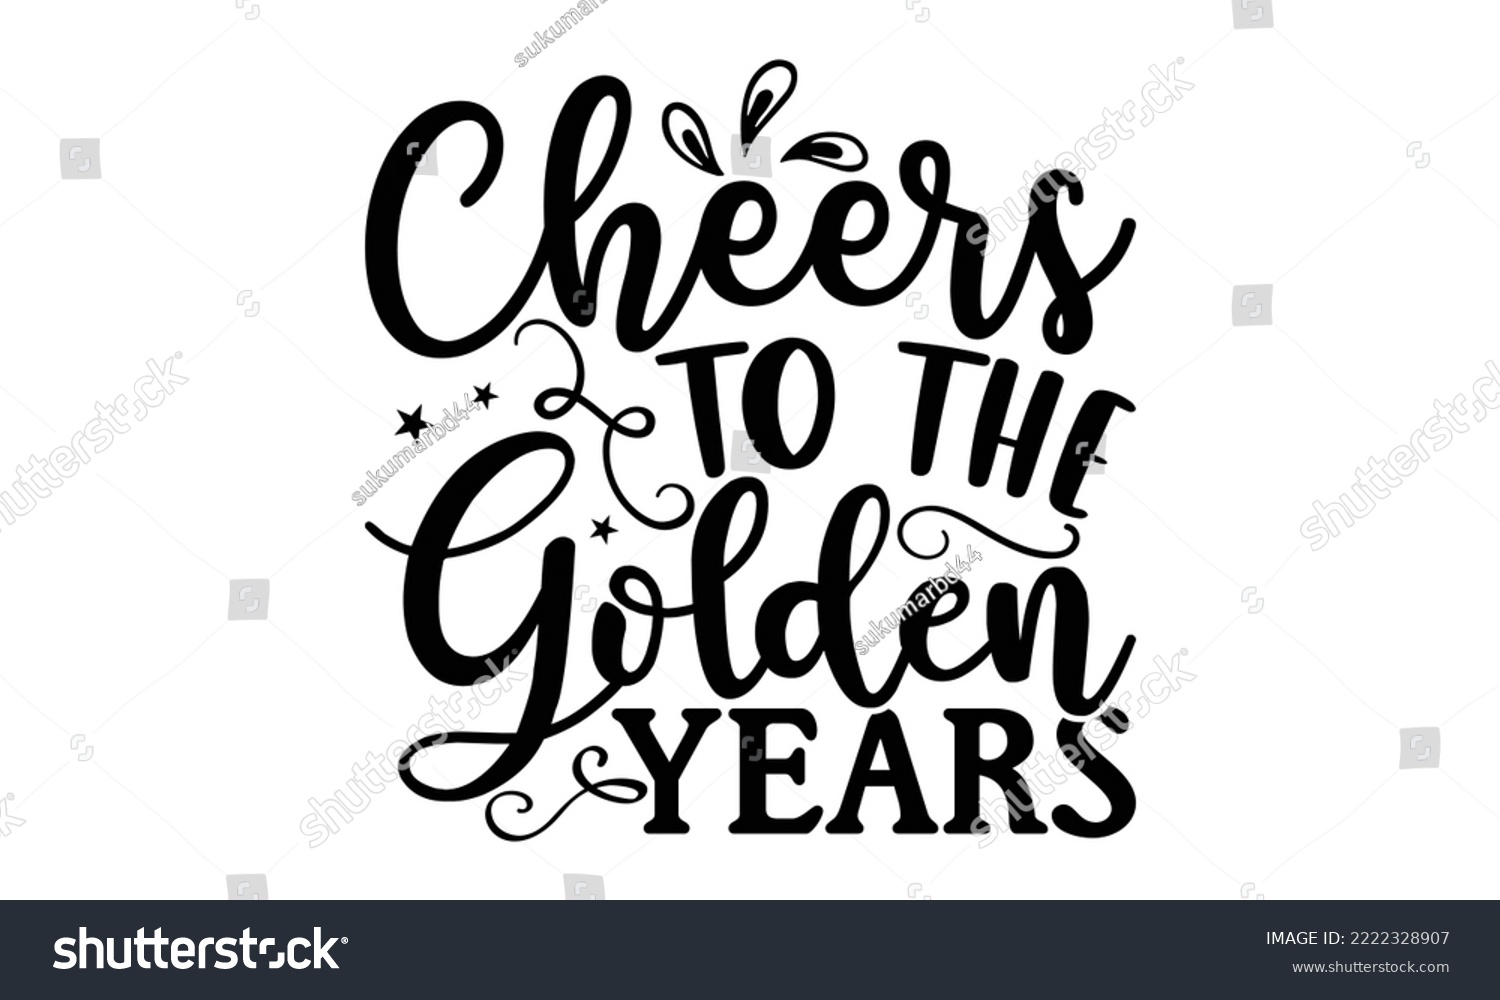 SVG of Cheers To The Golden Years - Retirement t-shirt design, Hand drawn lettering phrase, Calligraphy graphic design, eps, svg Files for Cutting svg